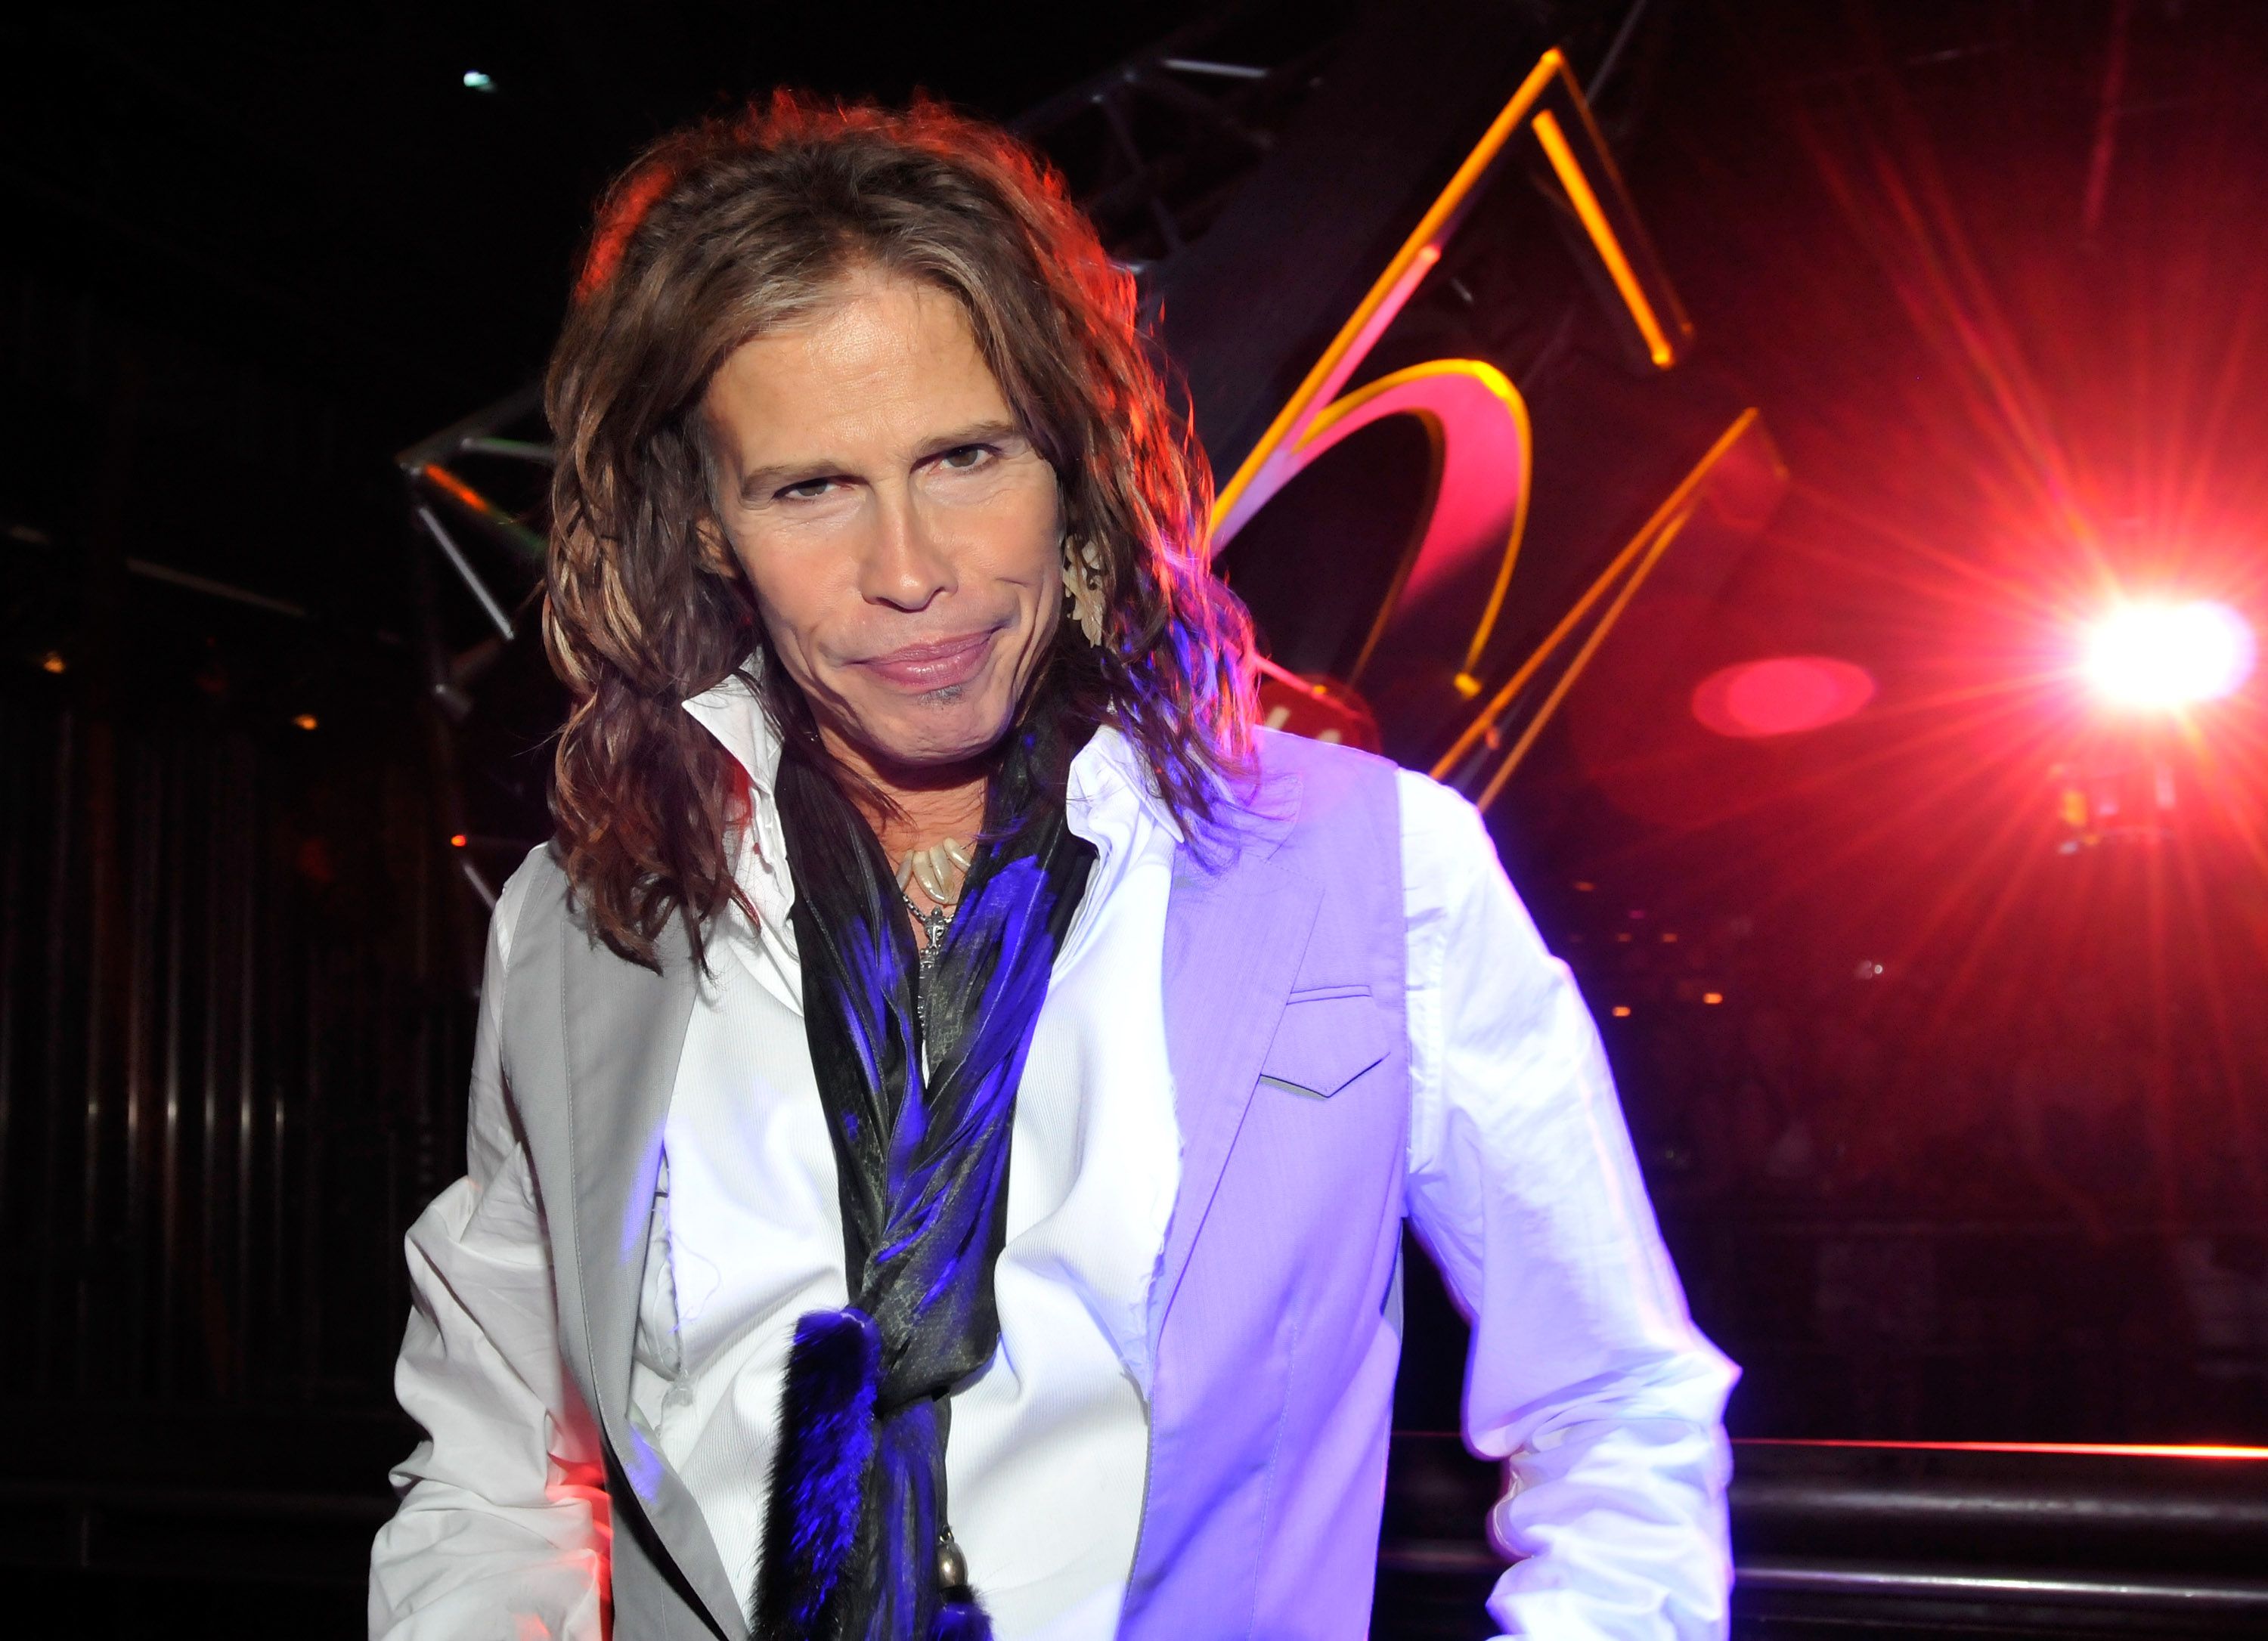 LAS VEGAS - AUGUST 01: Aerosmith singer Steven Tyler attends an after concert party at Studio 54 inside the MGM Grand Hotel/Casino early August 1, 2010 in Las Vegas, Nevada. (Photo by David Becker/Getty Images for Studio 54)